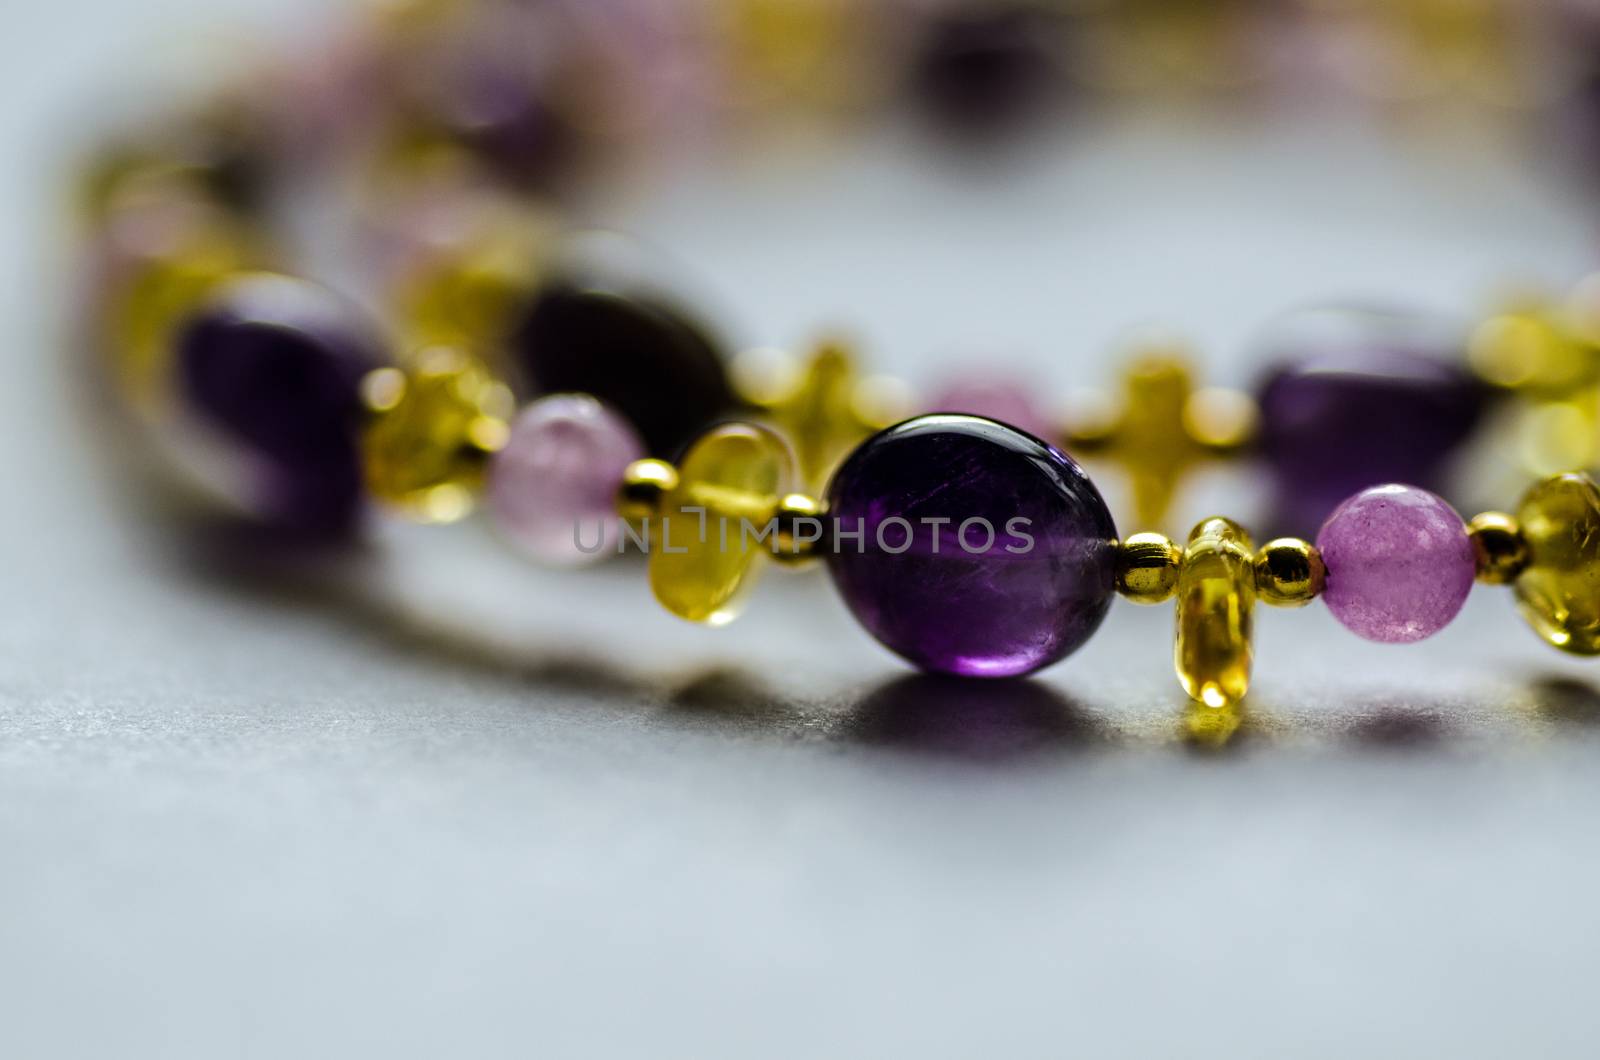 Necklace hand made from amethyst, quartz and amber beads interspersed with gold plated beads.  